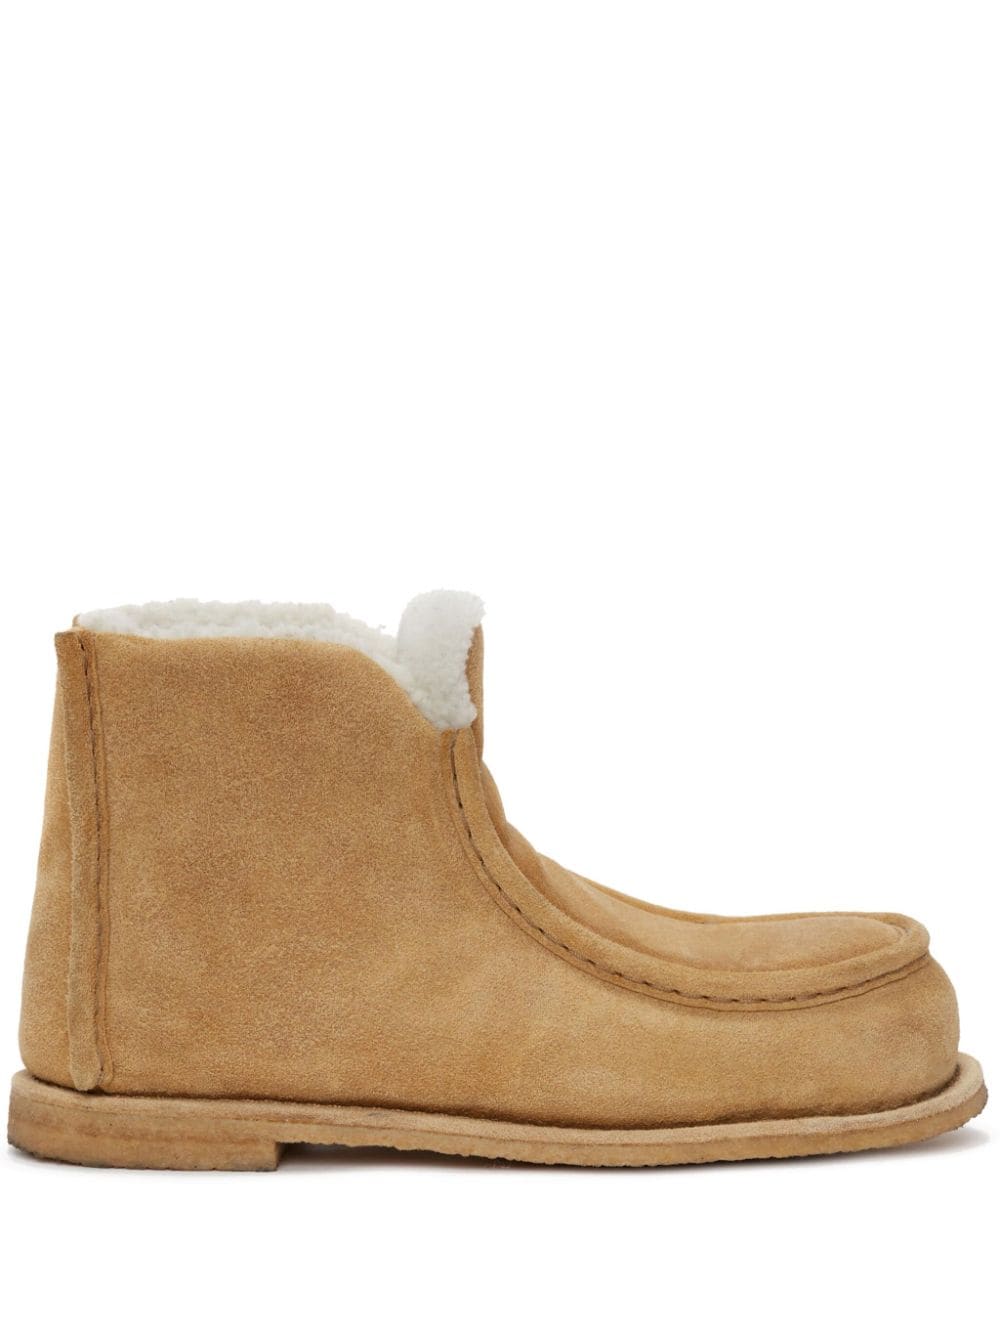 JW Anderson padded ankle boots - Neutrals von JW Anderson